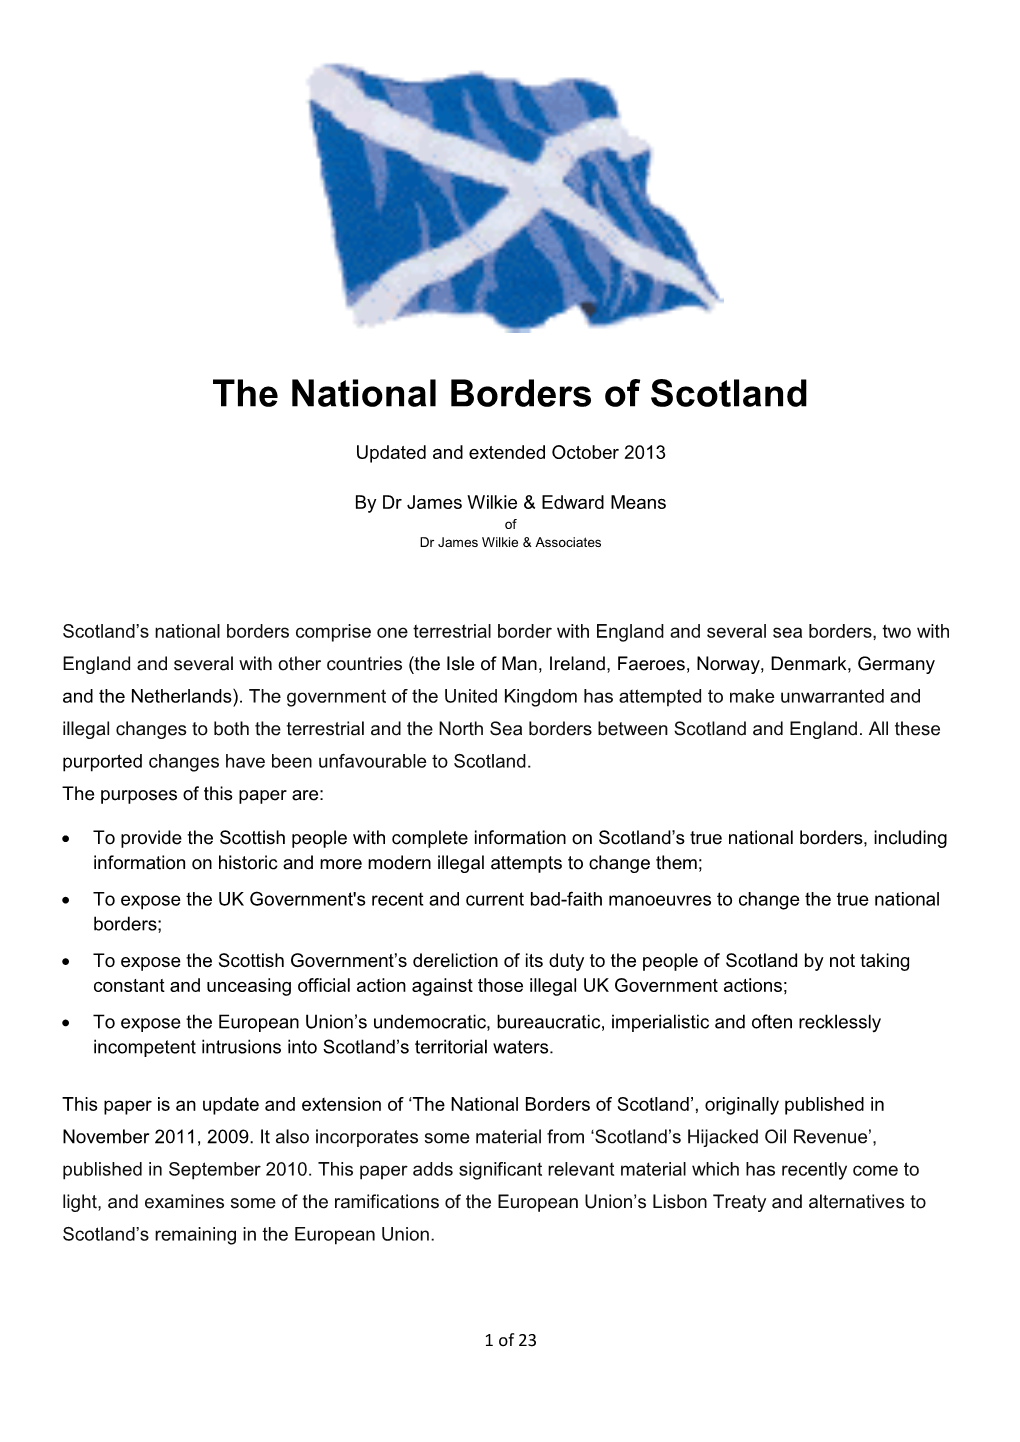 The National Borders of Scotland